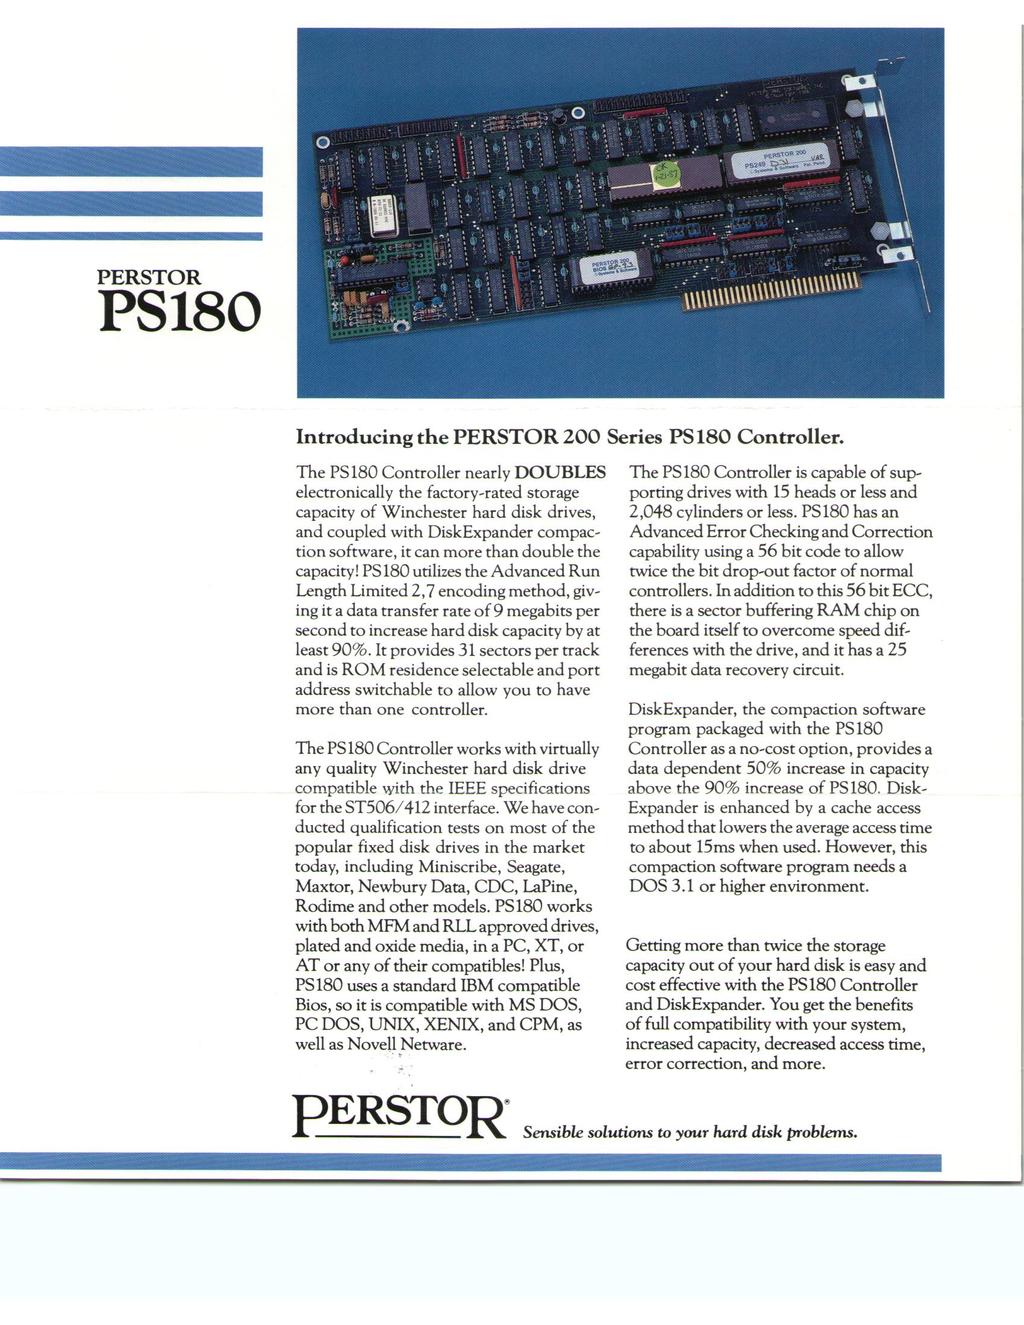 PS180 Introducing the PERSTOR 200 Series PS 180 Controller.